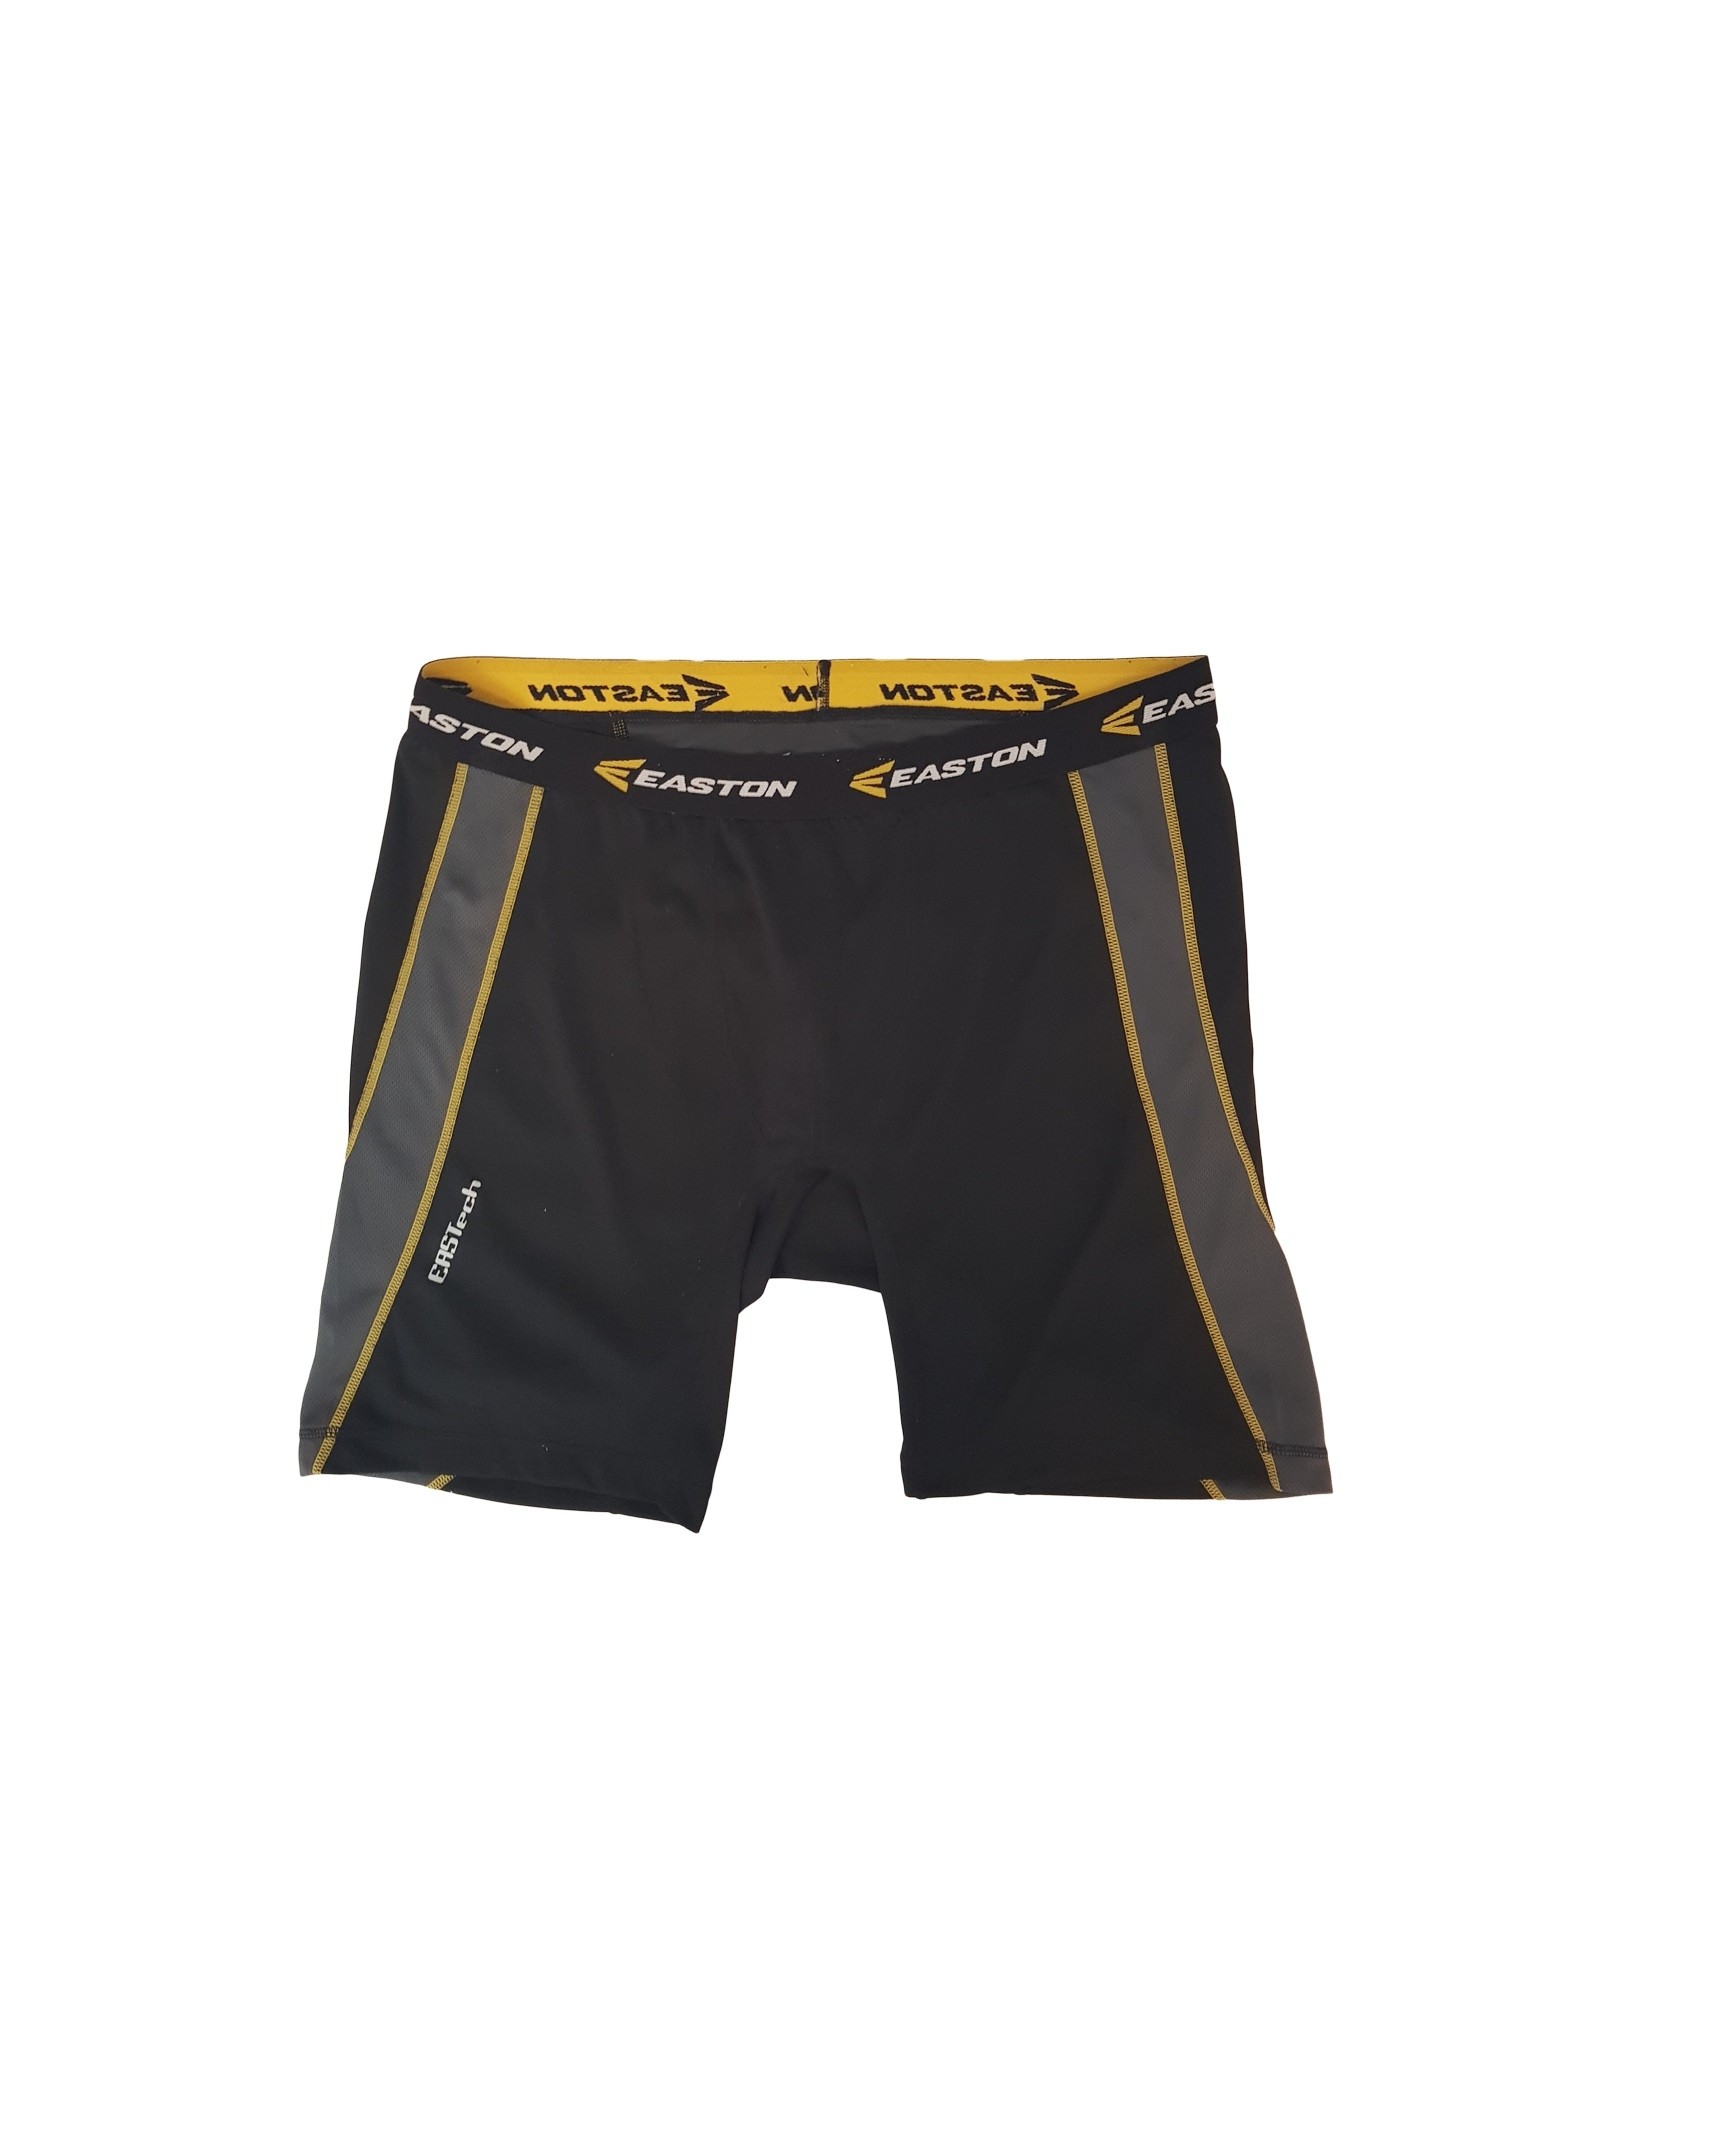 Easton Eastech Pro Adult Compression Shorts